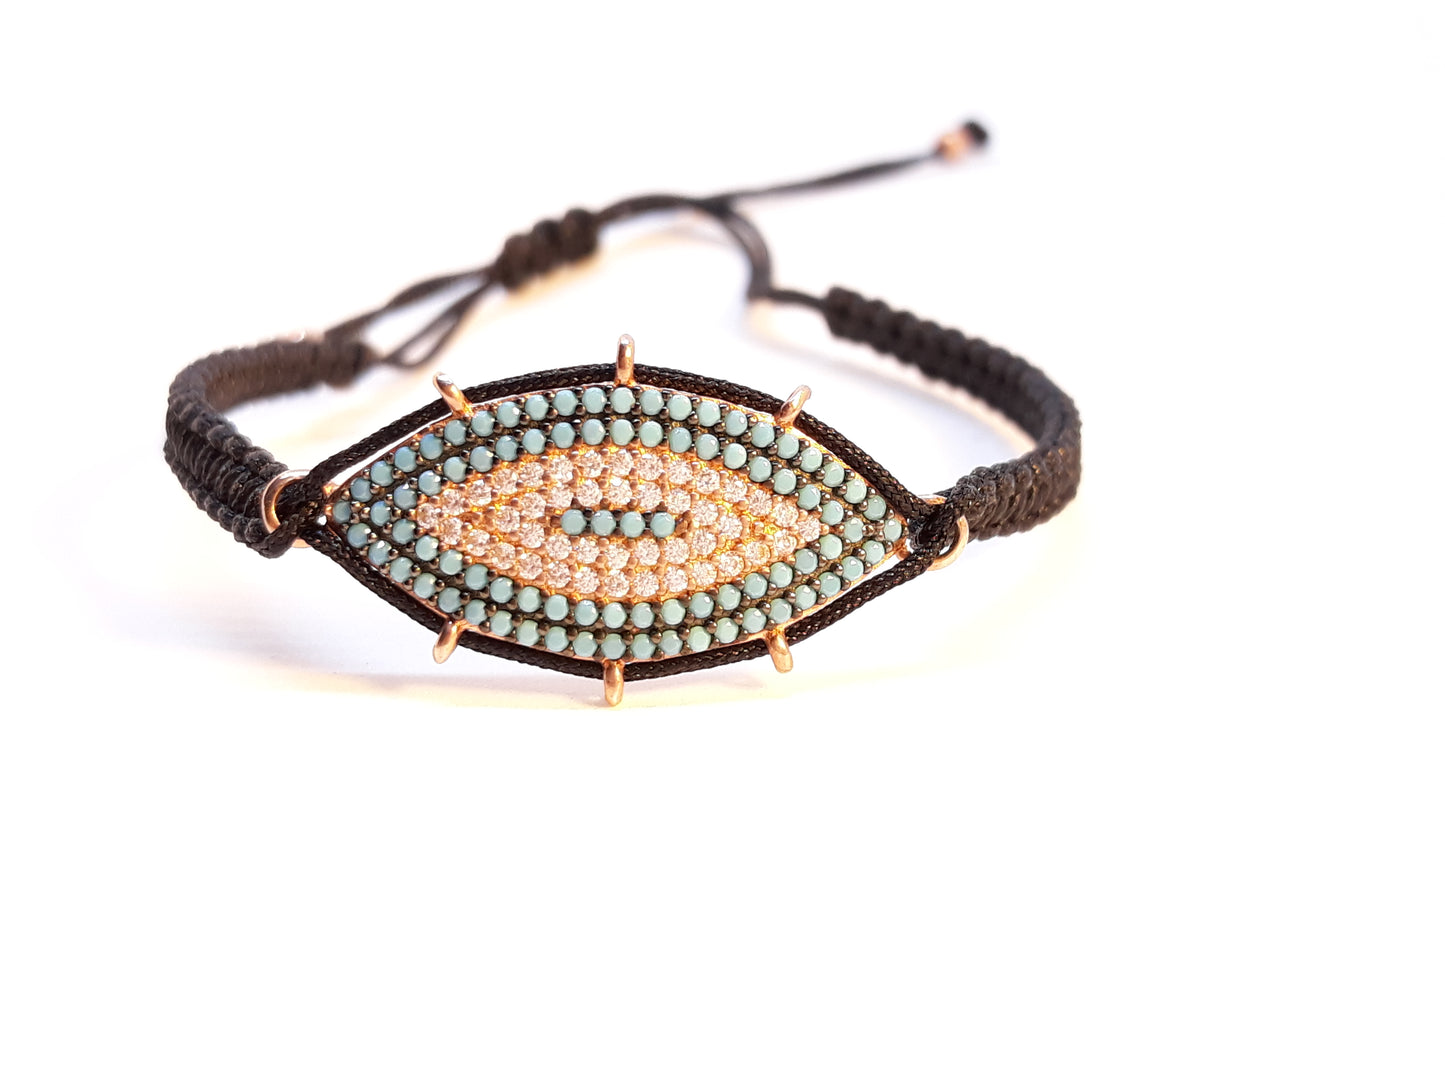 Evil Eye Bracelet "Mati macrame, silver 925 rosegold-plated with Turquoise, zircons semi-precious stones Symbols Collection